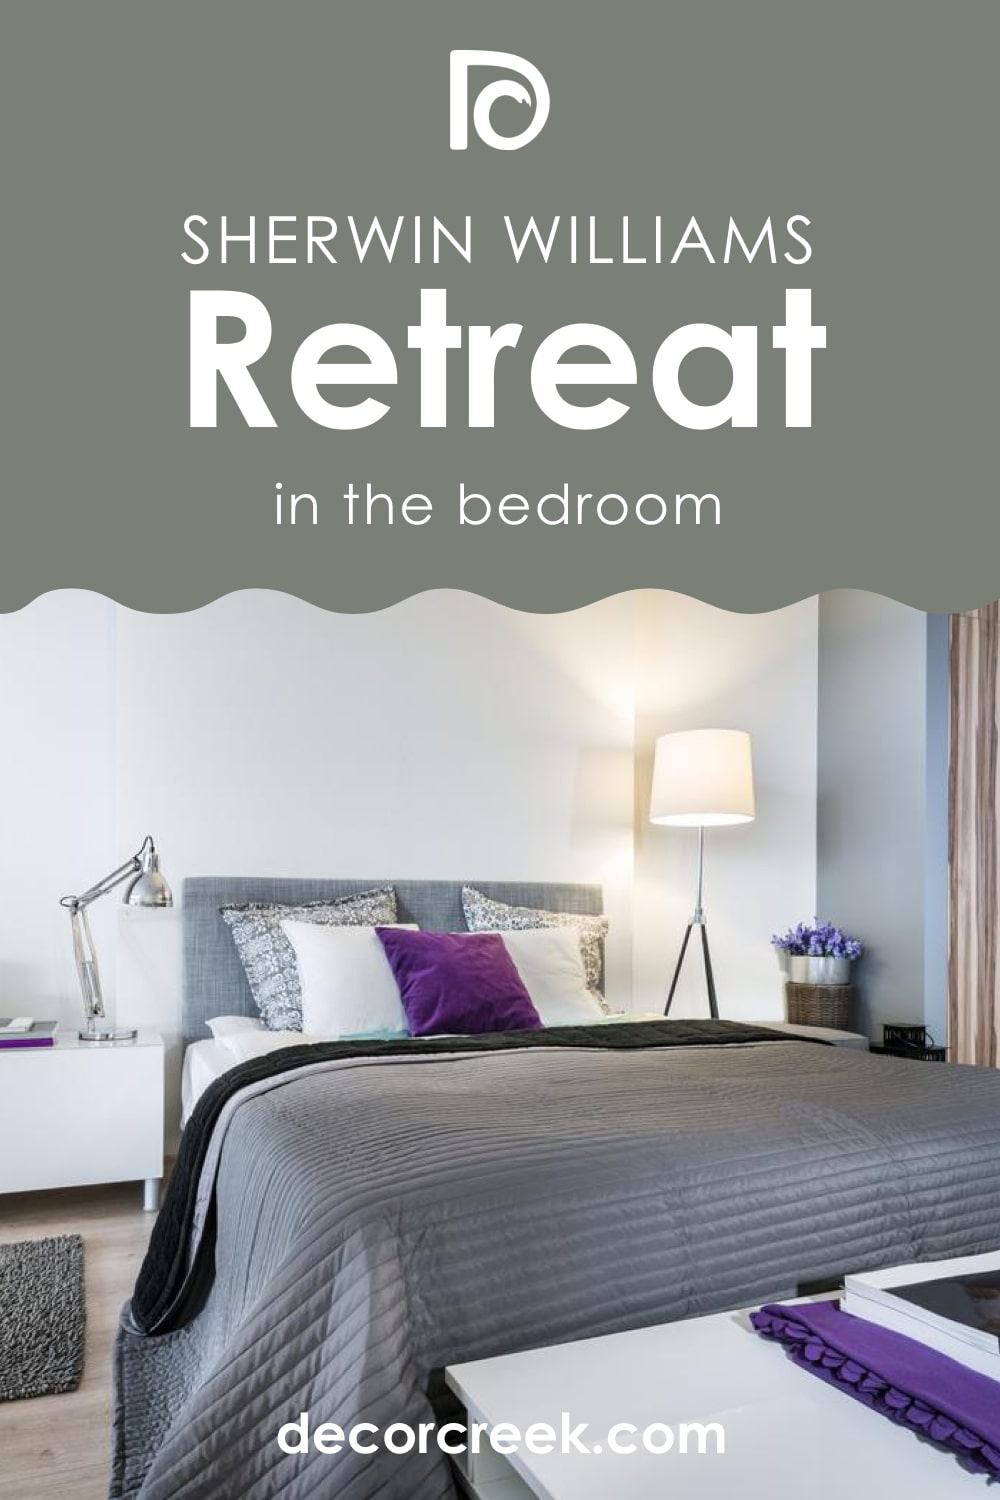 Can Retreat by Sherwin-Williams Be Used In a Bedroom?